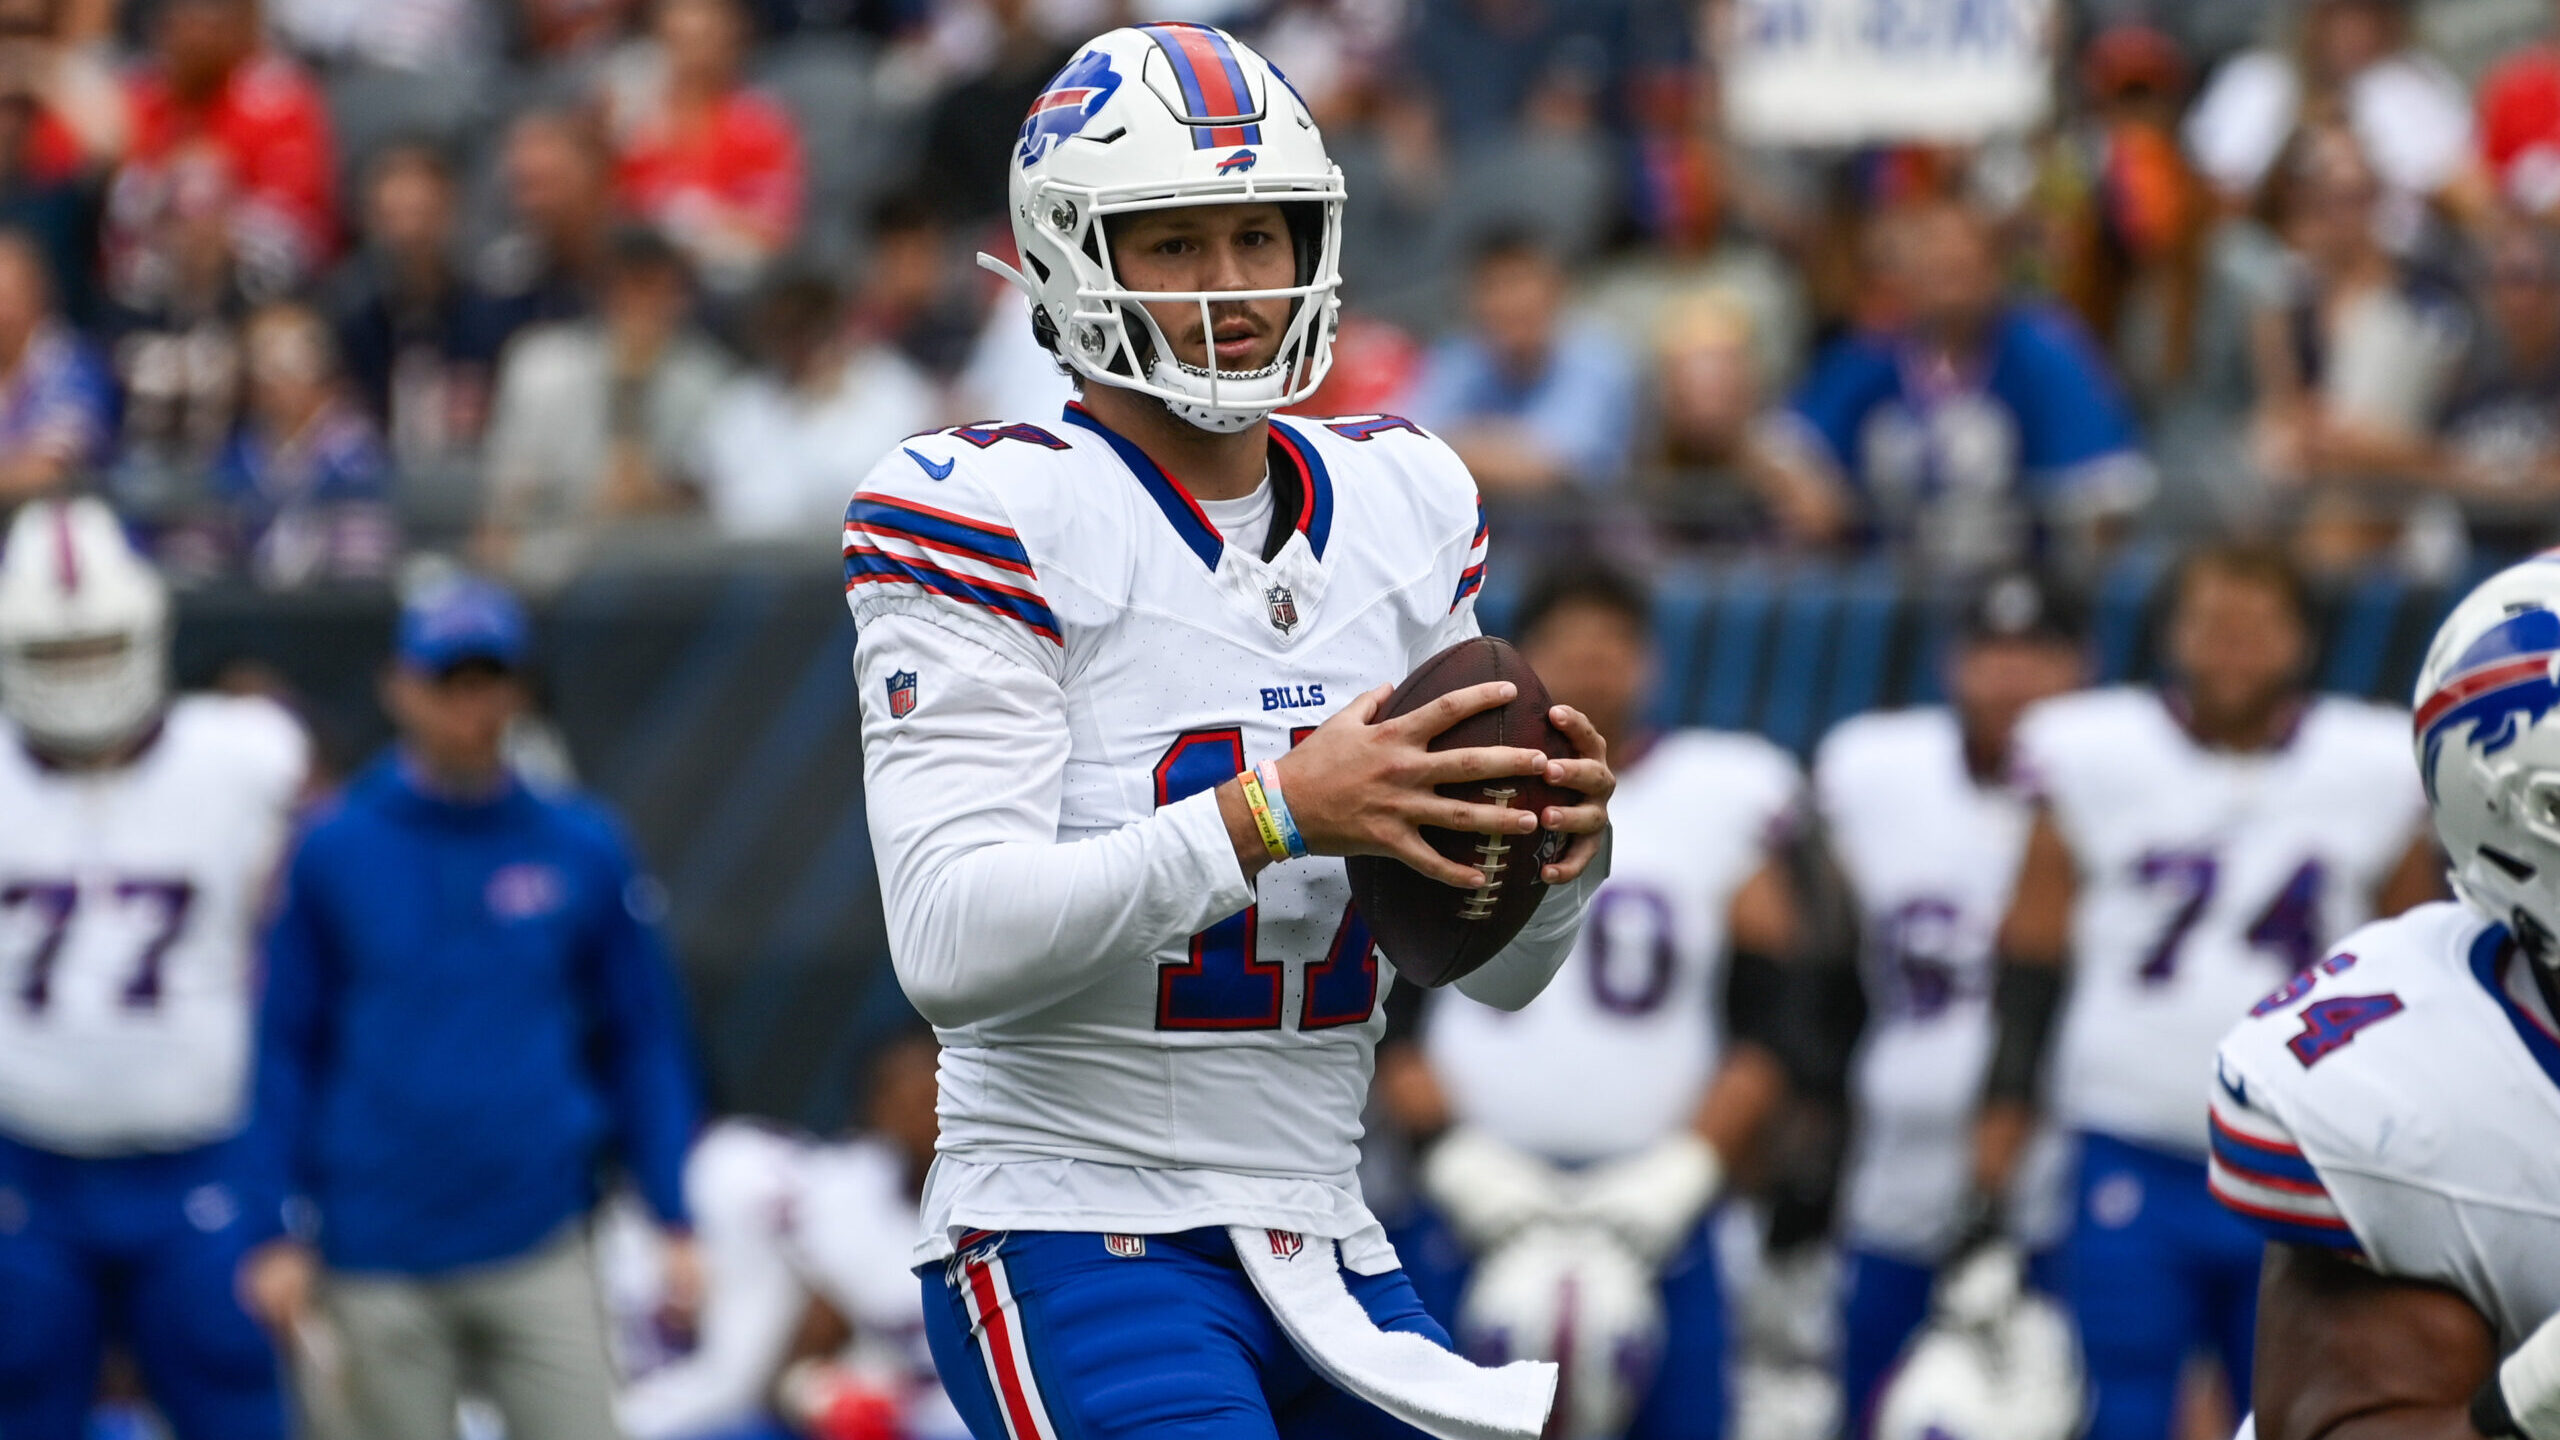 Buffalo Bills: Disastrous Start Raises Questions In AFC East